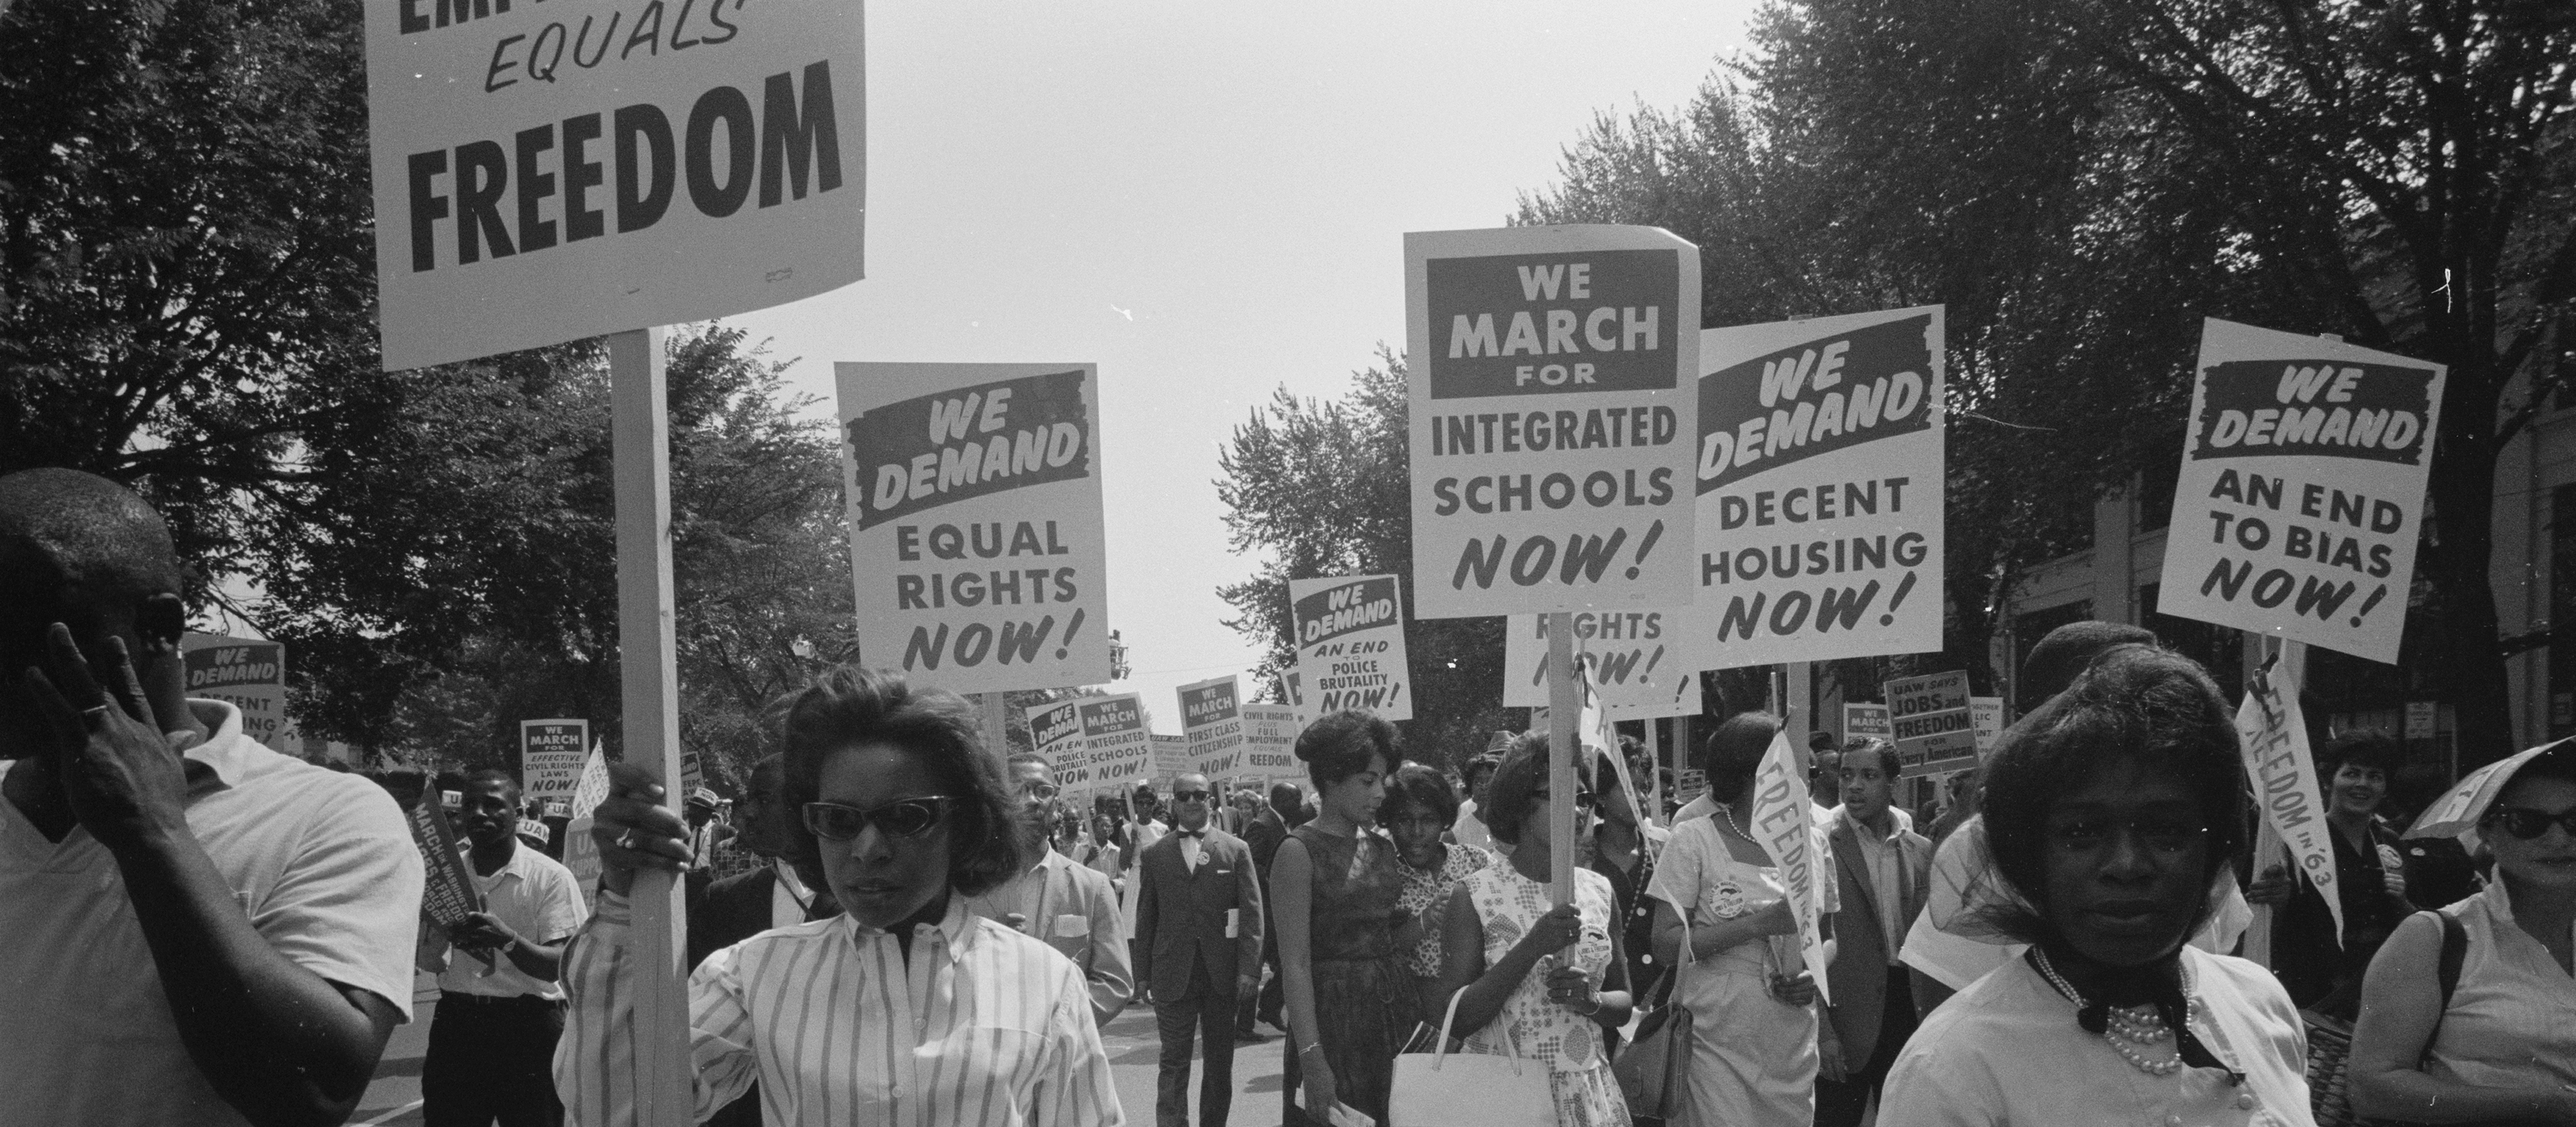 March on Washington for Jobs and Freedom, 1963, in Washington, D.C. Photo by Warren K. Leffler, courtesy of the Library of Congress. A group of African-Americans carry protest signs in support of civil rights. 